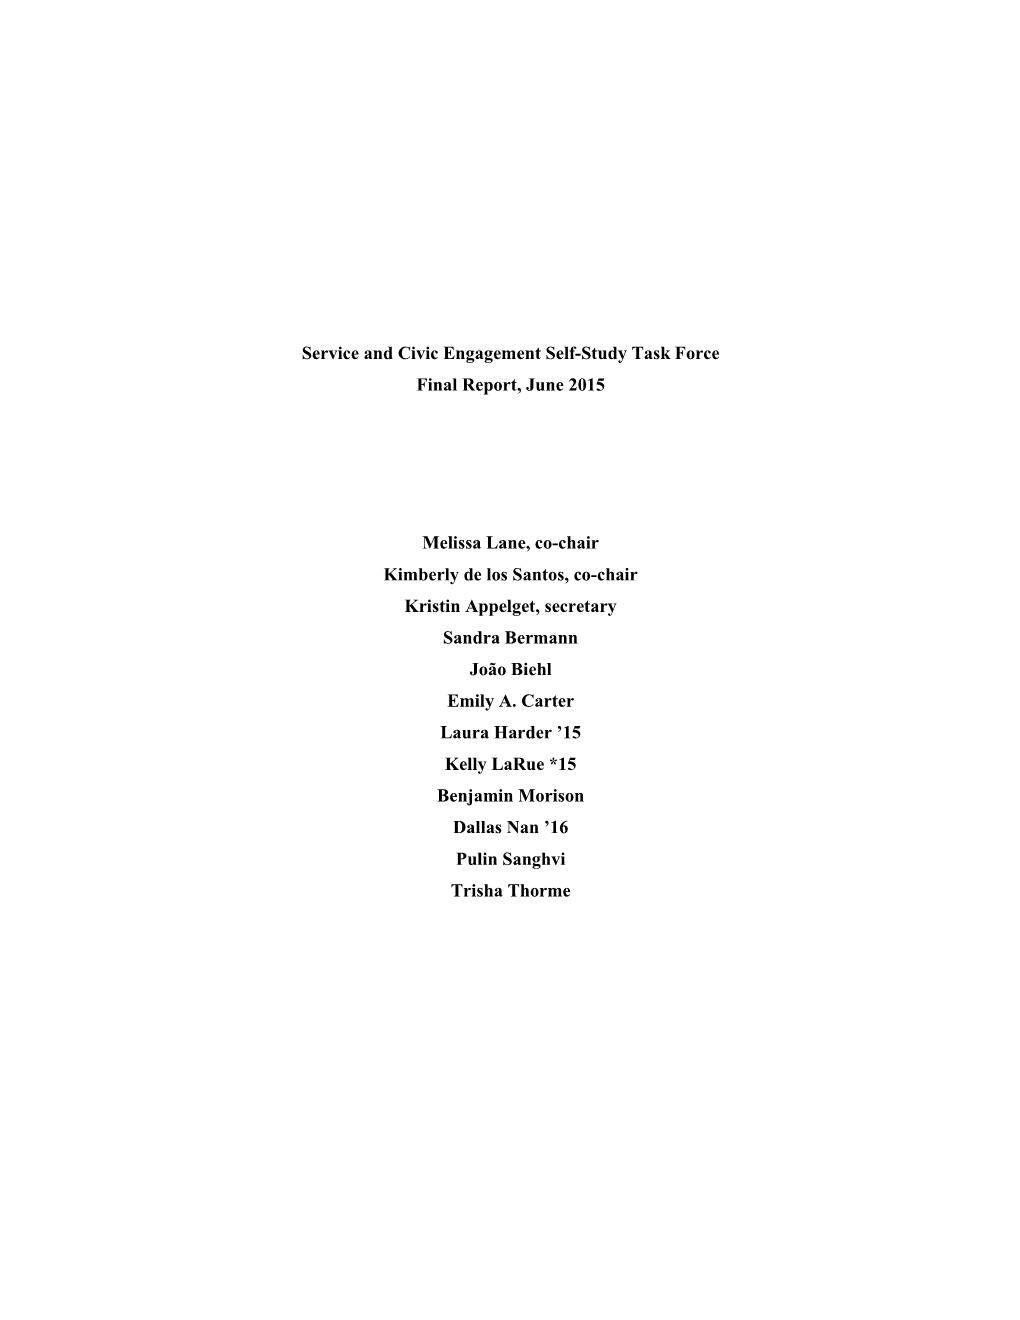 Service and Civic Engagement Self-Study Task Force Final Report, June 2015